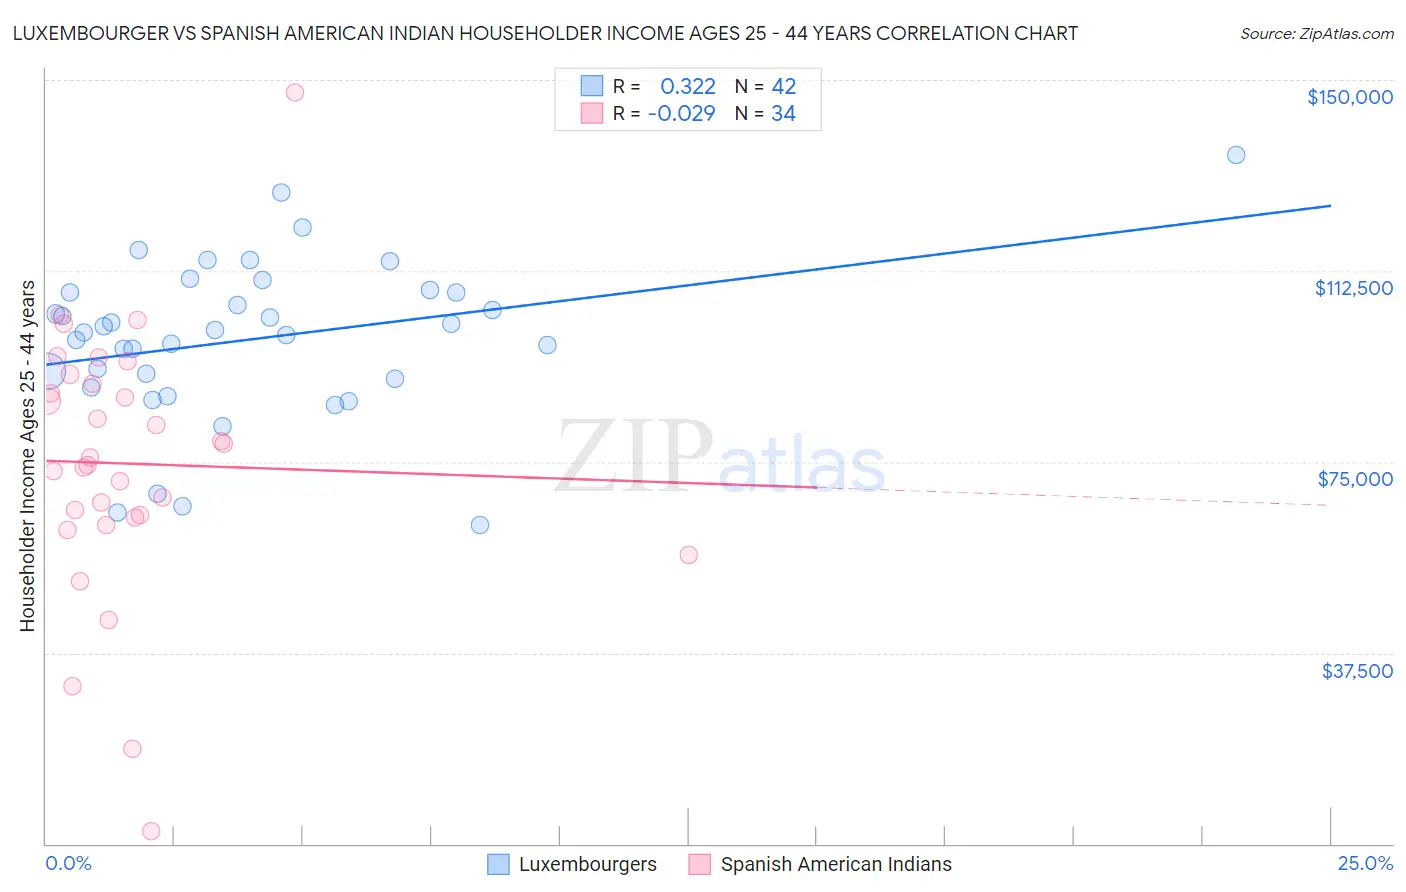 Luxembourger vs Spanish American Indian Householder Income Ages 25 - 44 years